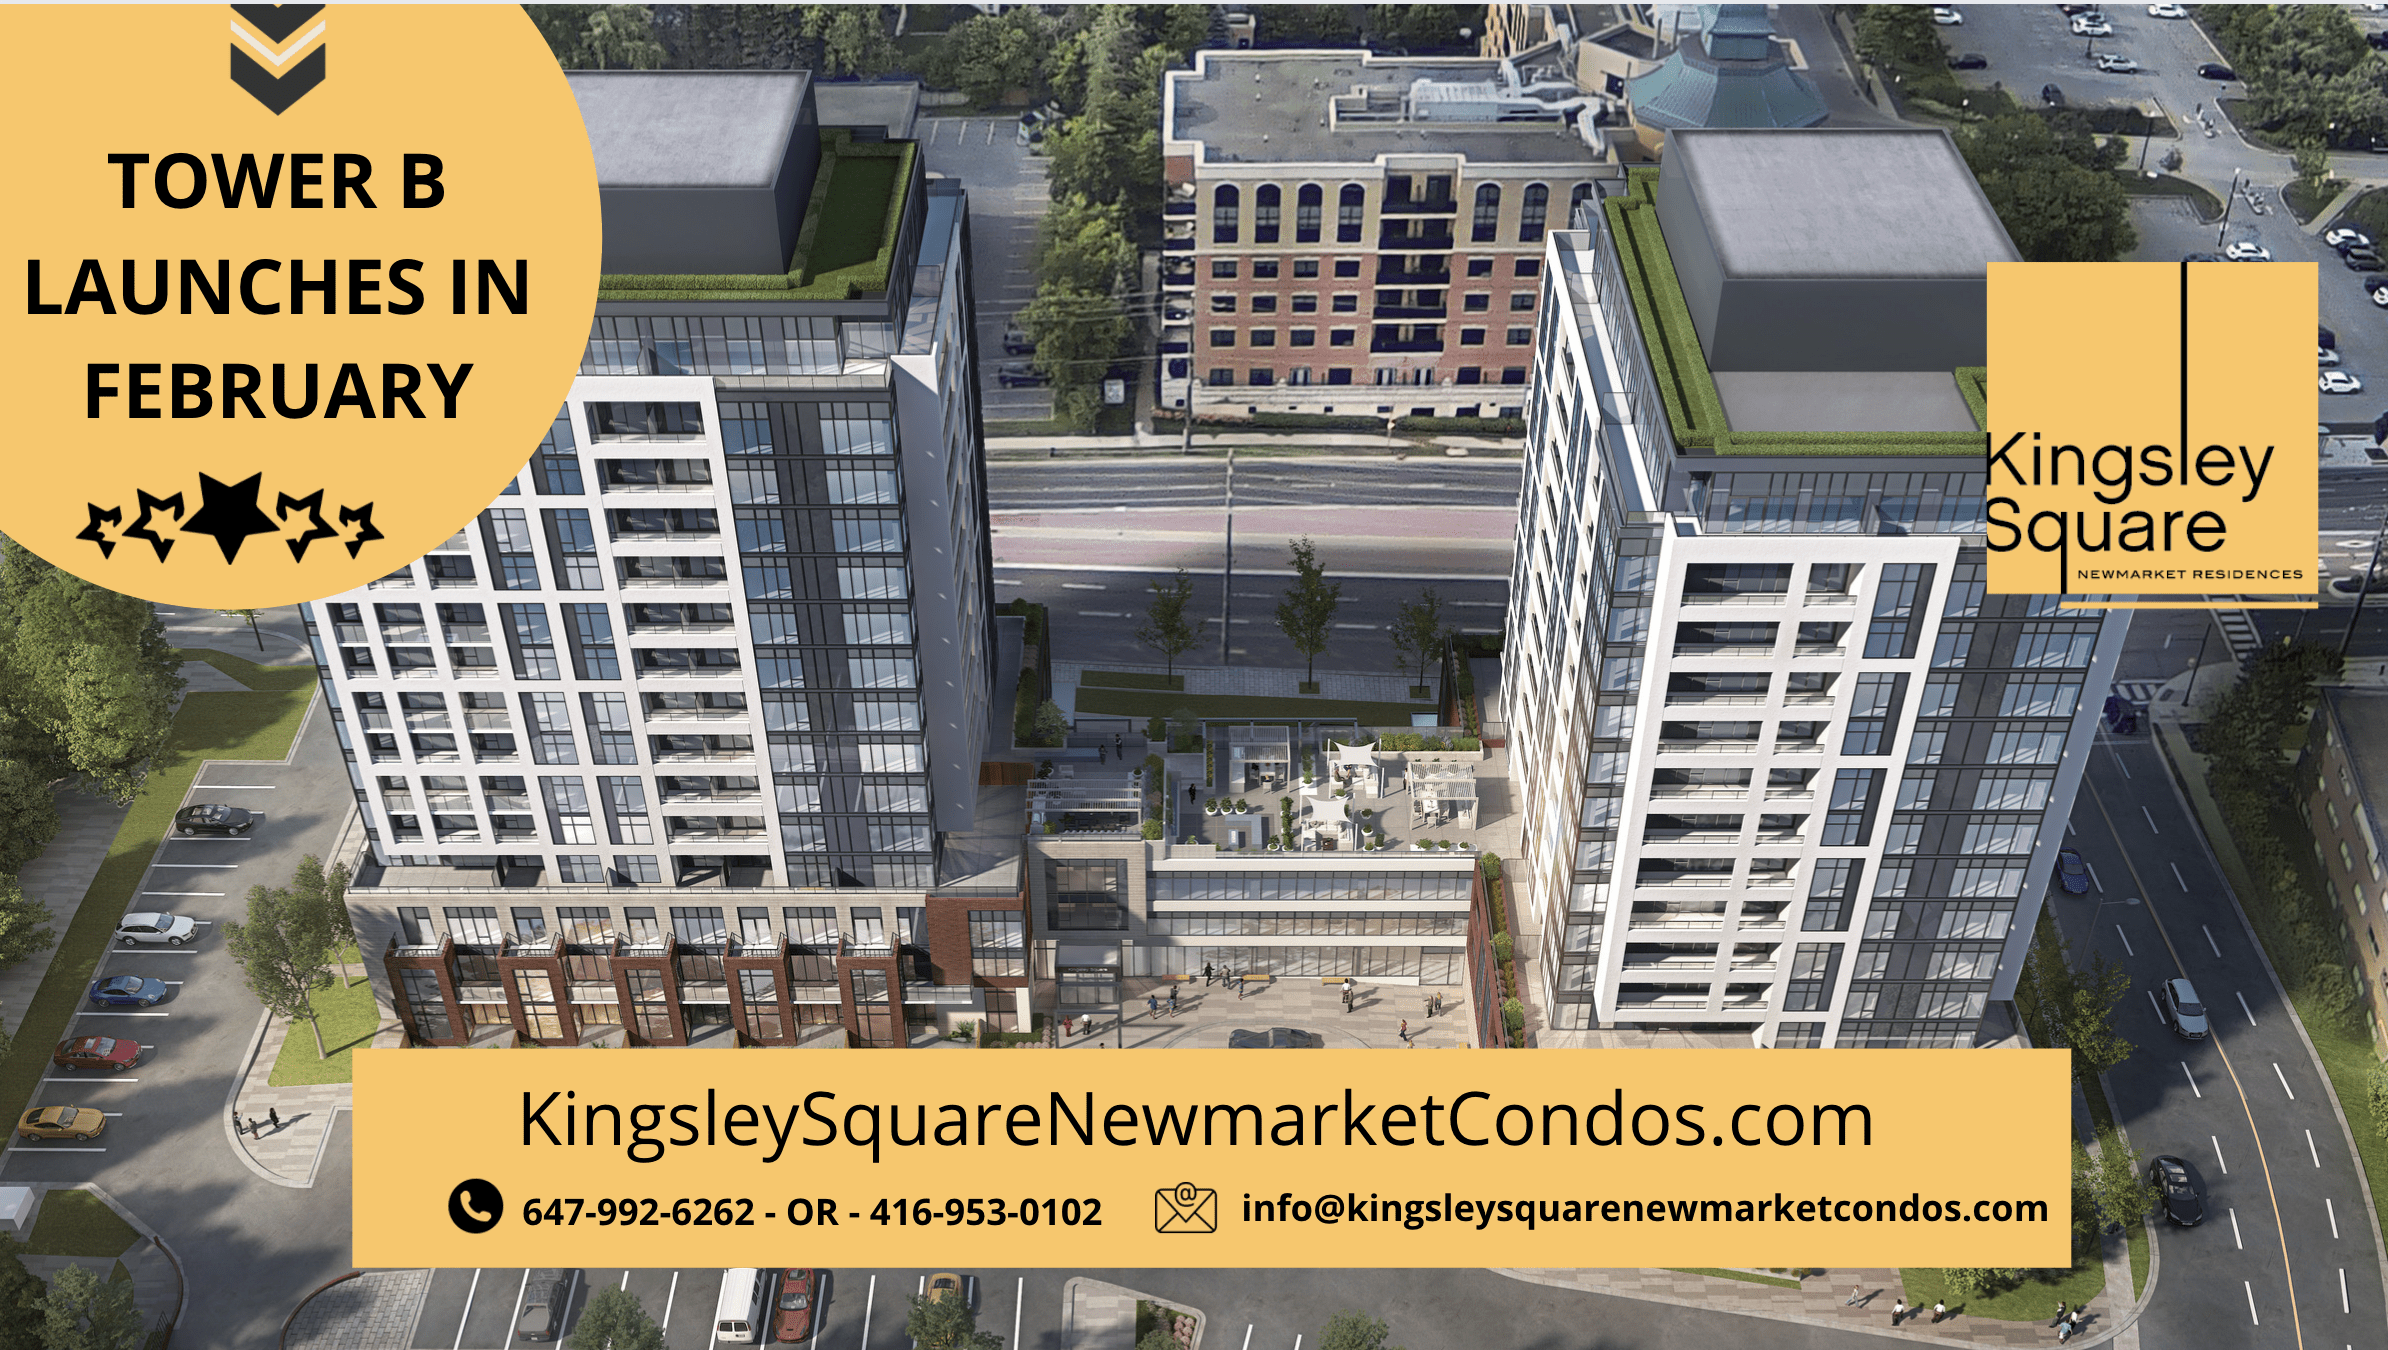 Kingsley Square Newmarket Condos – Tower B Launching Soon!